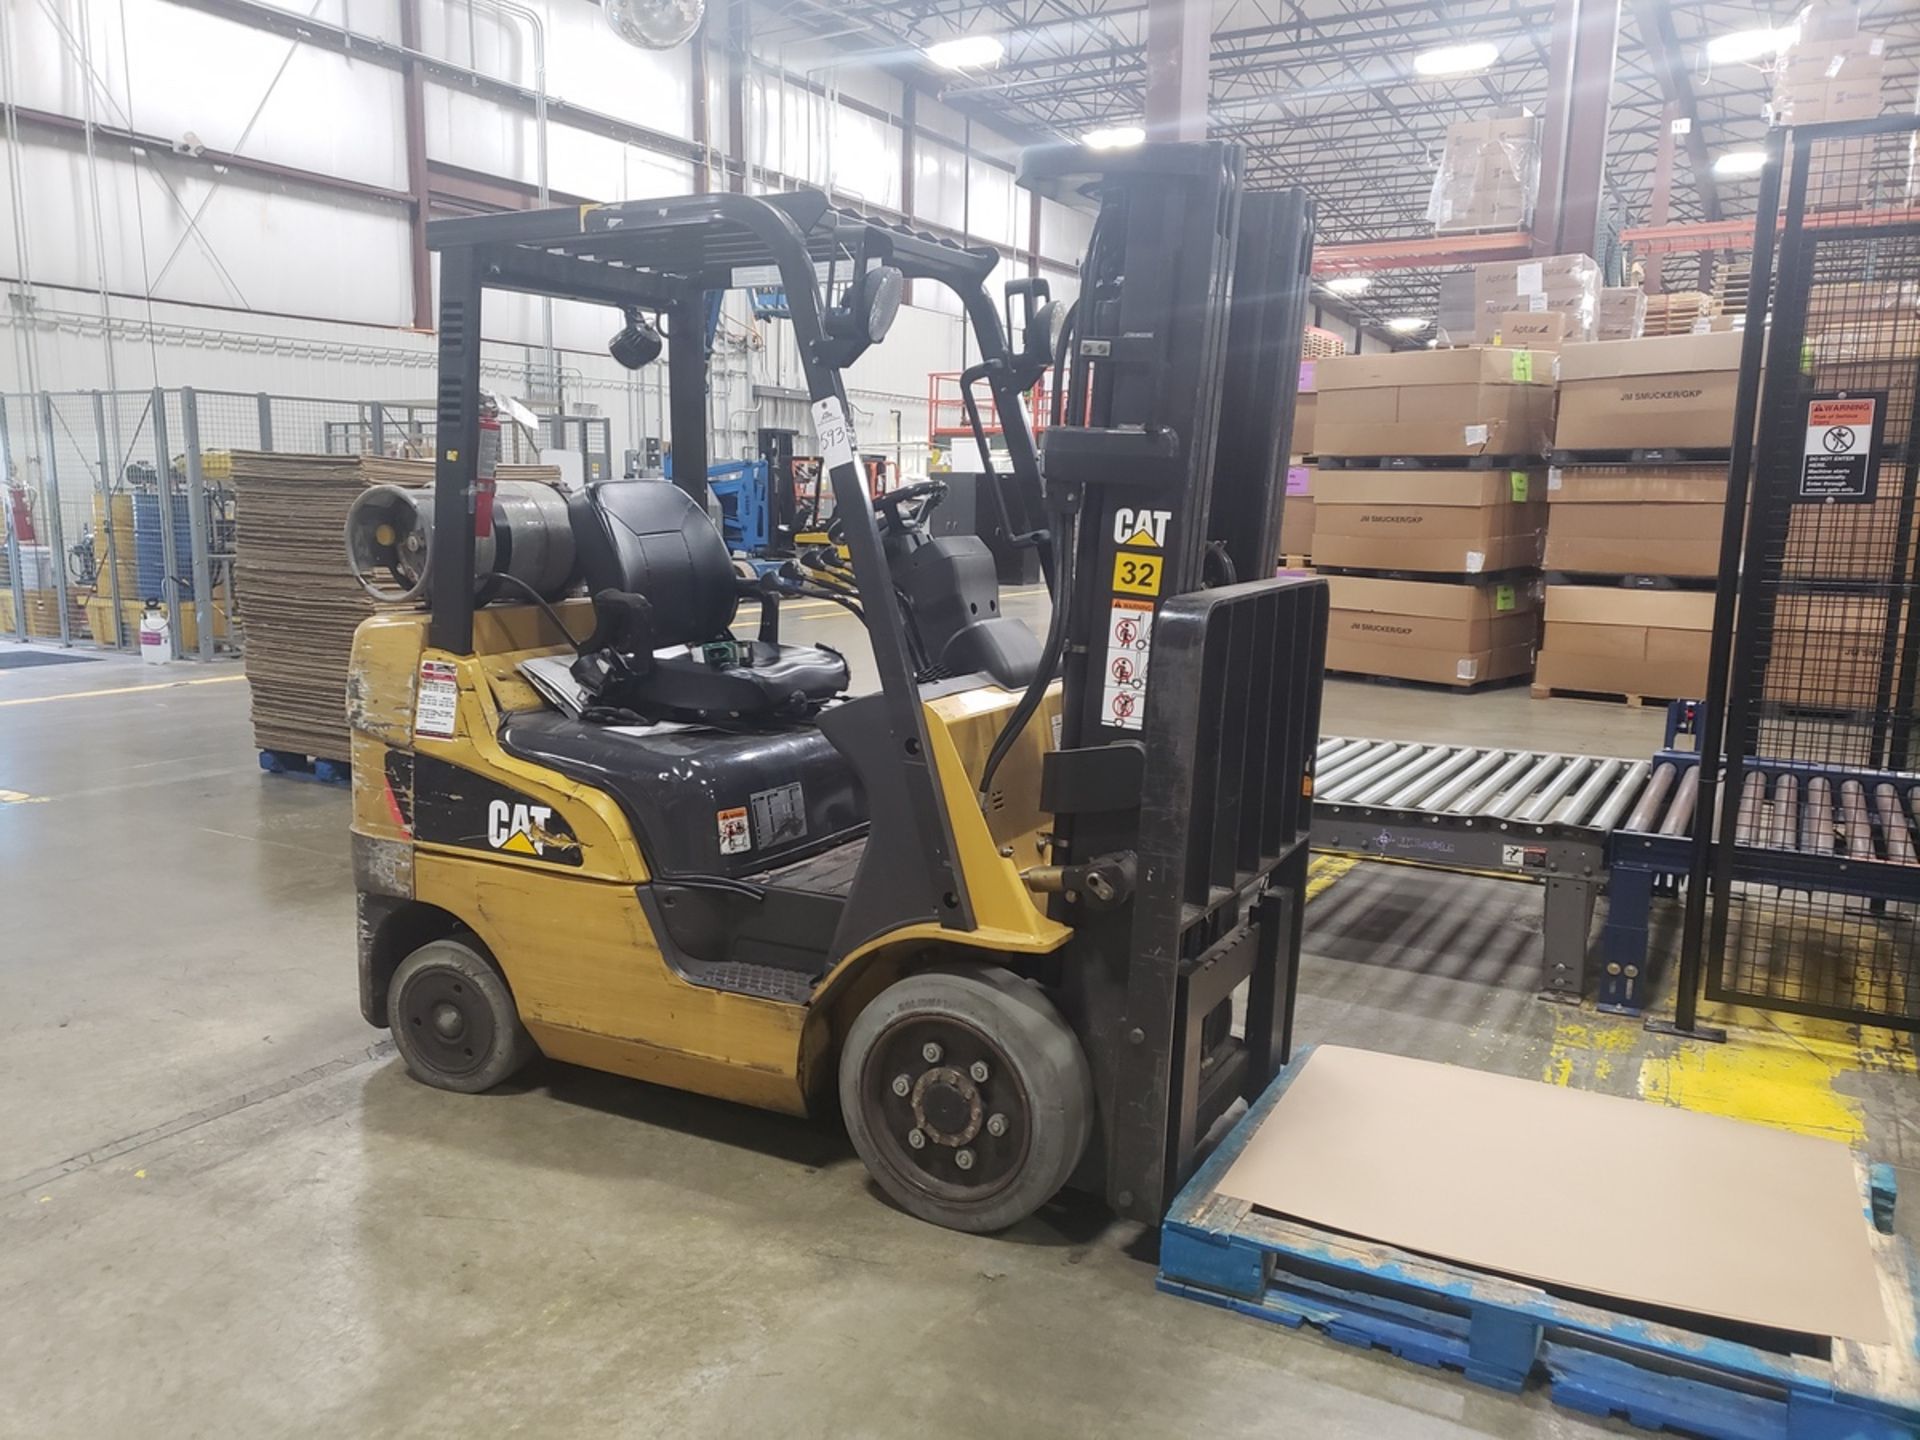 Caterpillar LP Forklift, 4750 Lb Capacity, Side Shift, 33251 Hours, M# C5000, S/N AT | Rig Fee $150